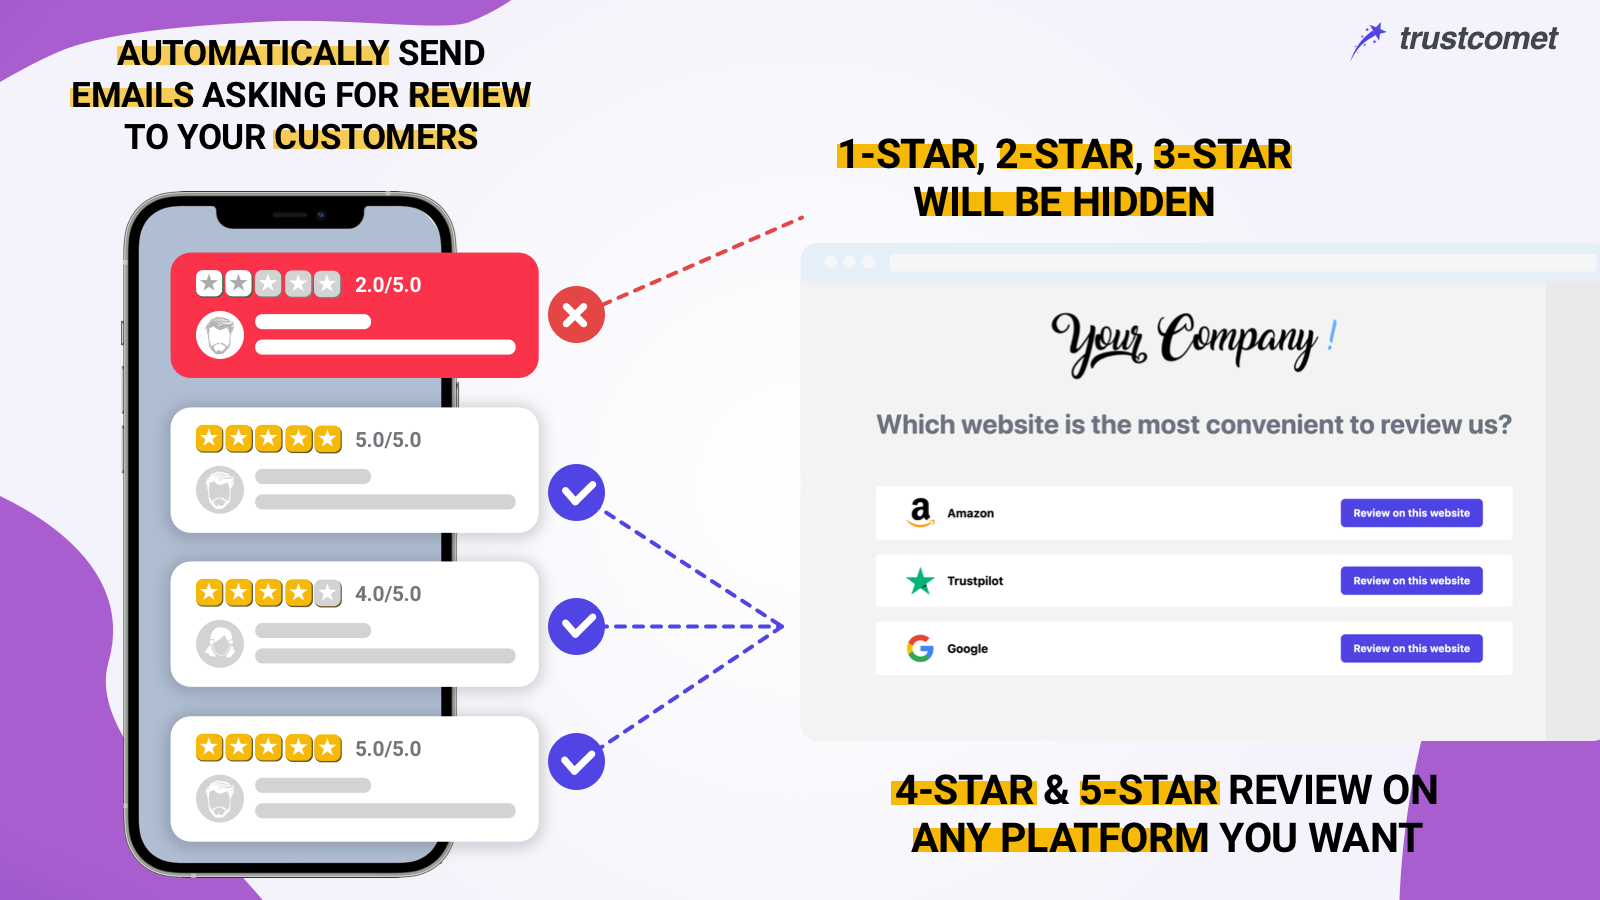 Send emails to collect reviews on Google,Yelp,Facebook